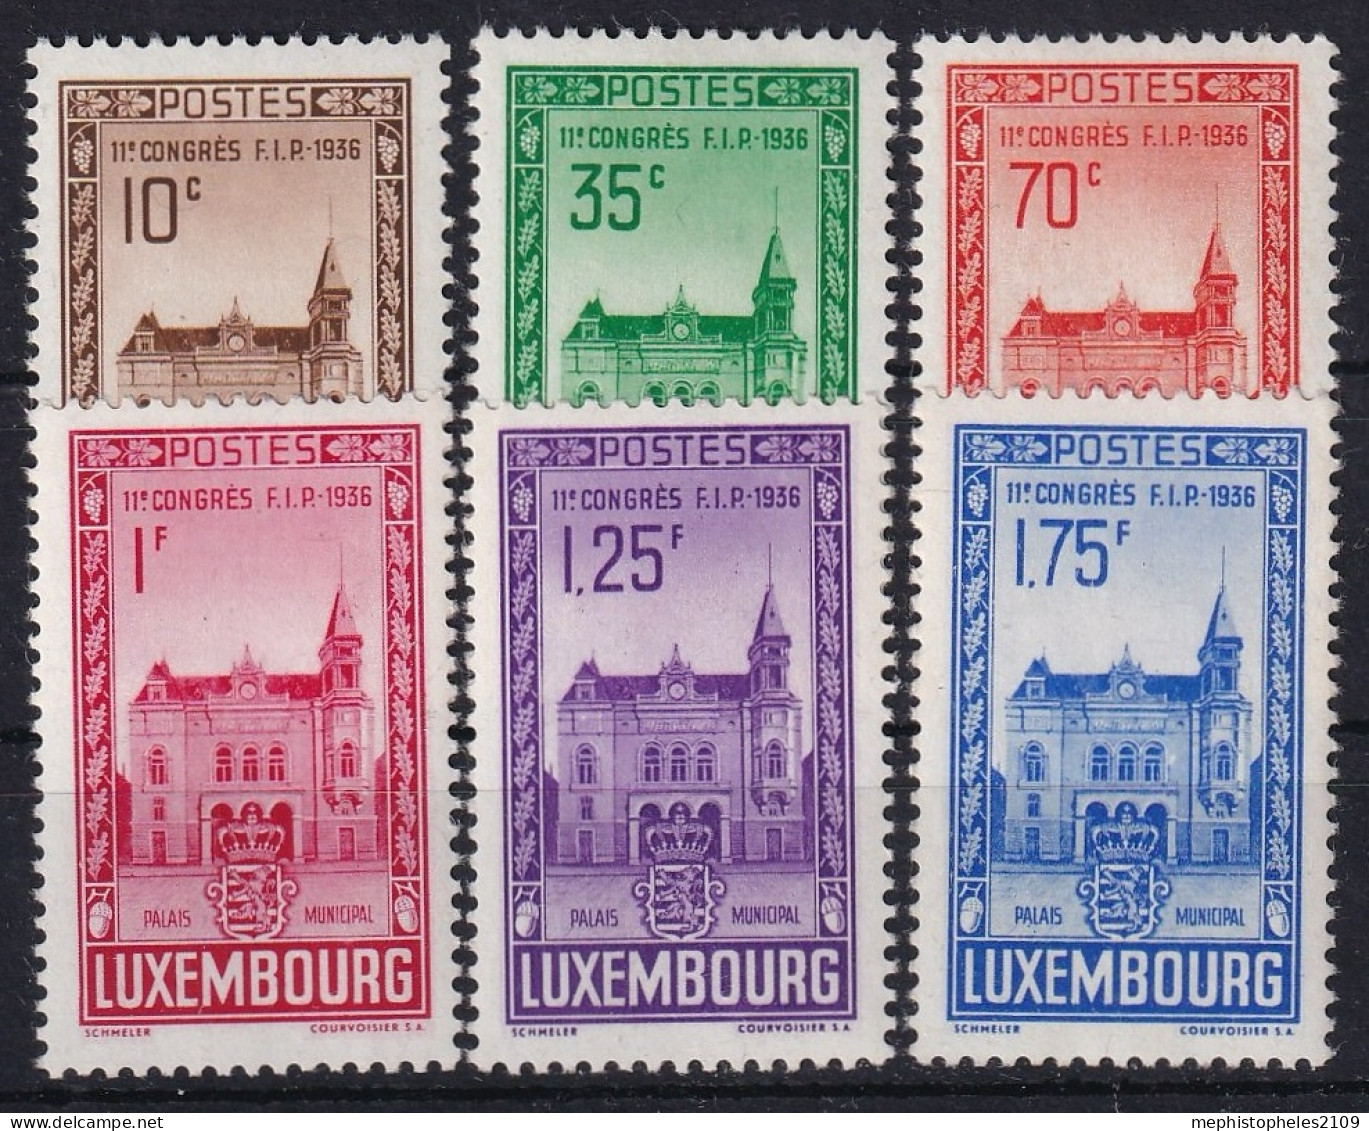 LUXEMBOURG 1936 - MNH - Sc# 200-205 (201: MLH) - Used Stamps